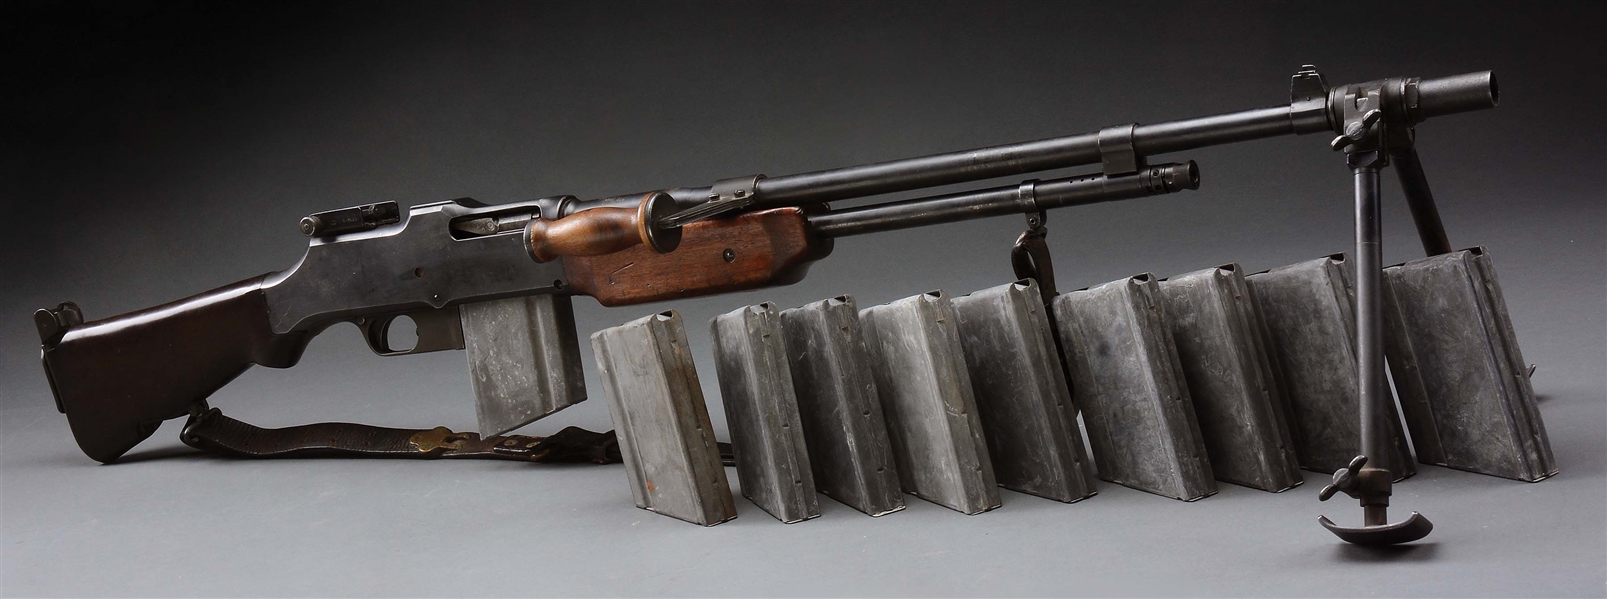 (N) VERY FINE ORIGINAL WORLD WAR I WINCHESTER MODEL 1918 BROWNING AUTOMTIC RIFLE (B.A.R) MACHINE GUN AS ARSENAL RETROFITTED TO 1918A2 CONFIGURATION FOR WW2 (CURIO AND RELIC).